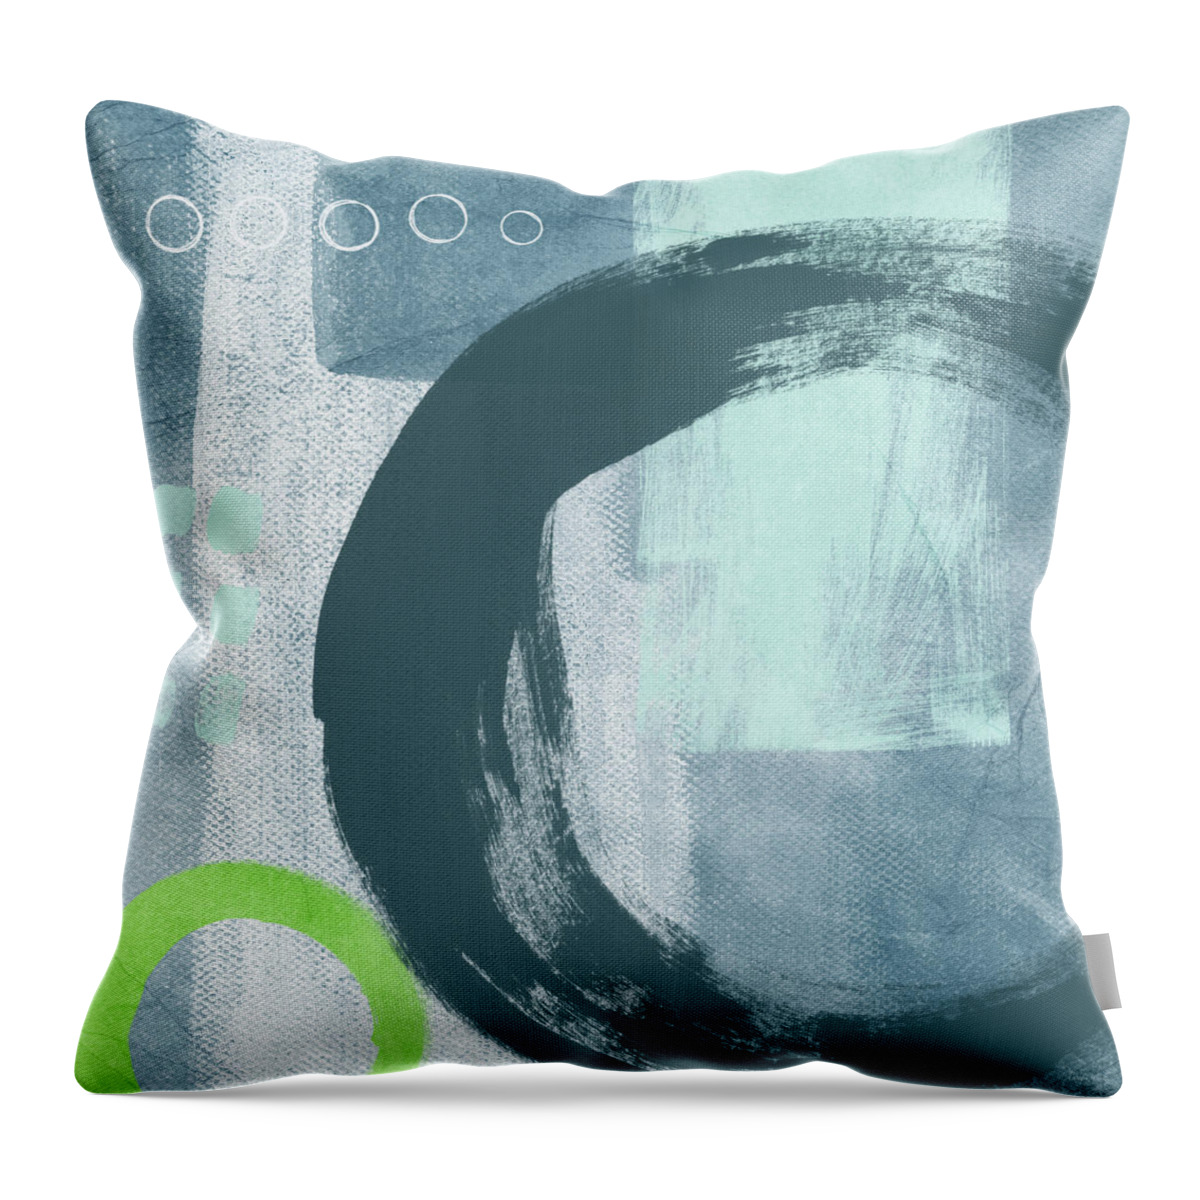 Abstract Throw Pillow featuring the painting Blue Circles 2- Art by Linda Woods by Linda Woods